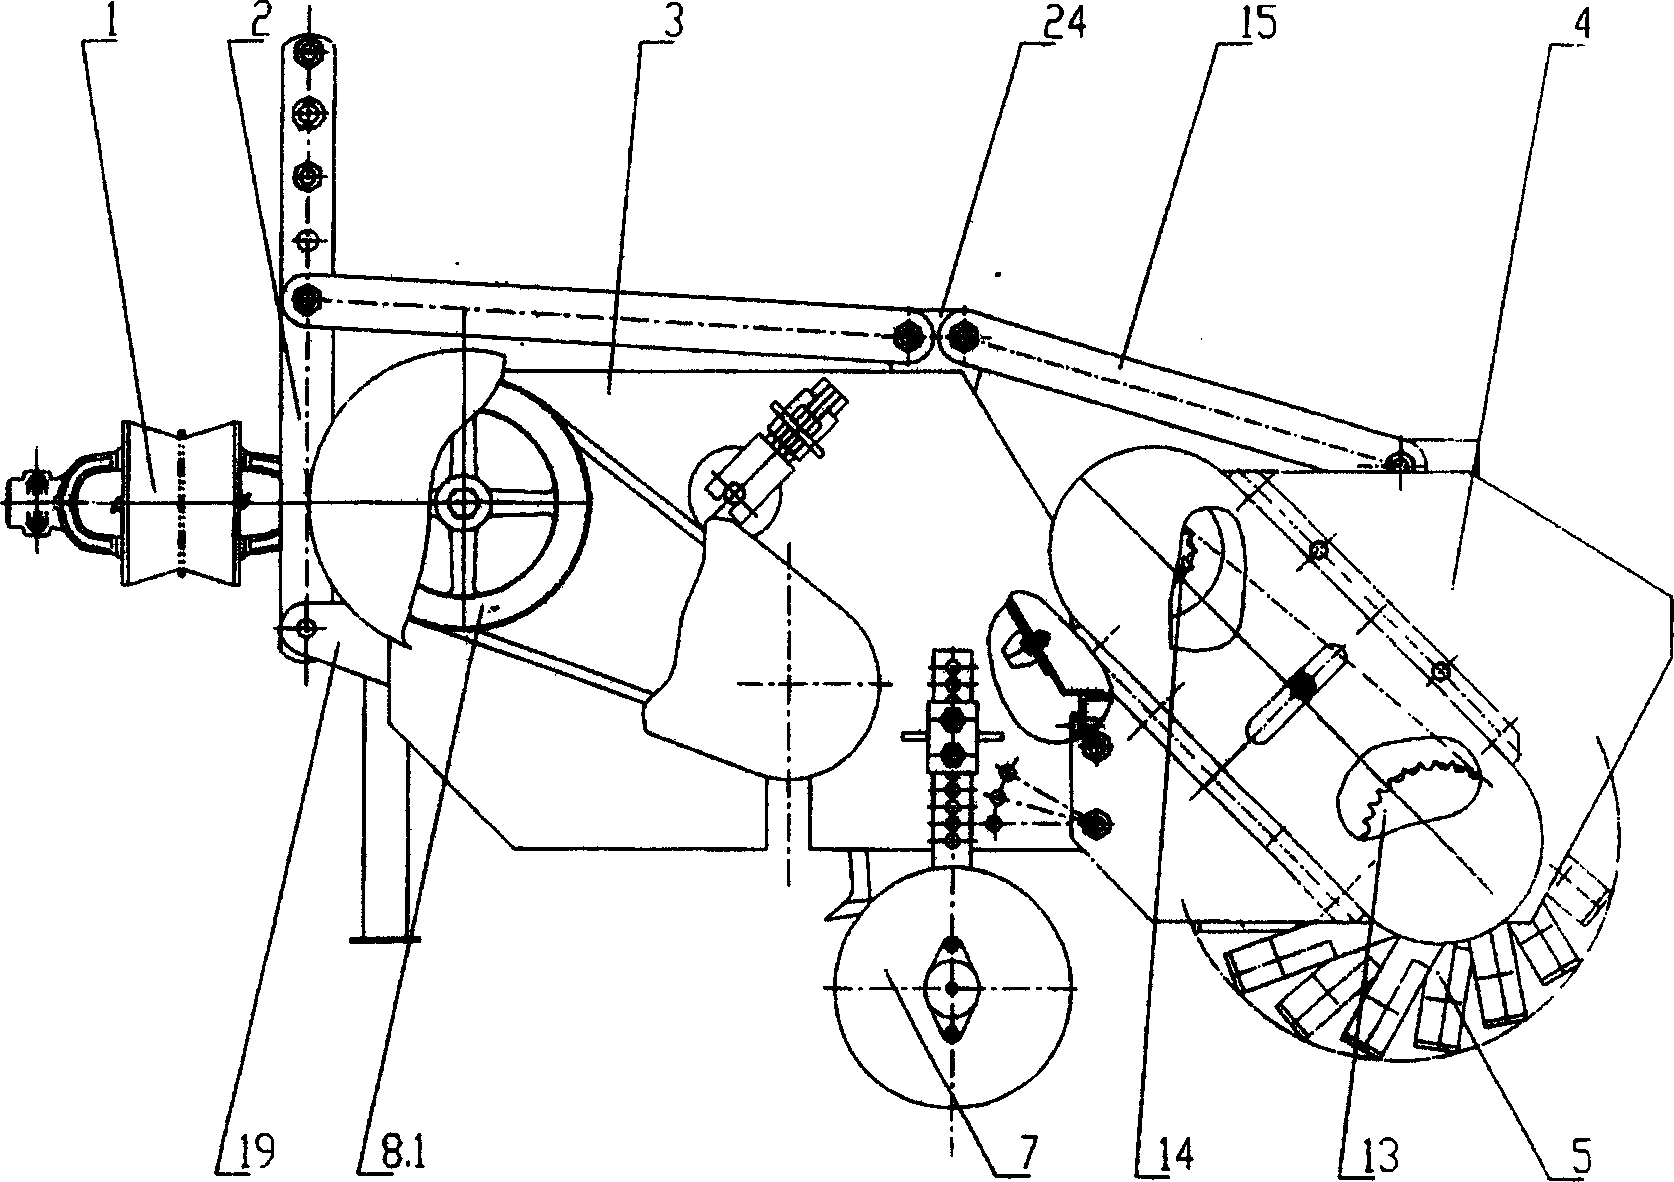 Combined processing machine for returning straw to field and crushing root stubble